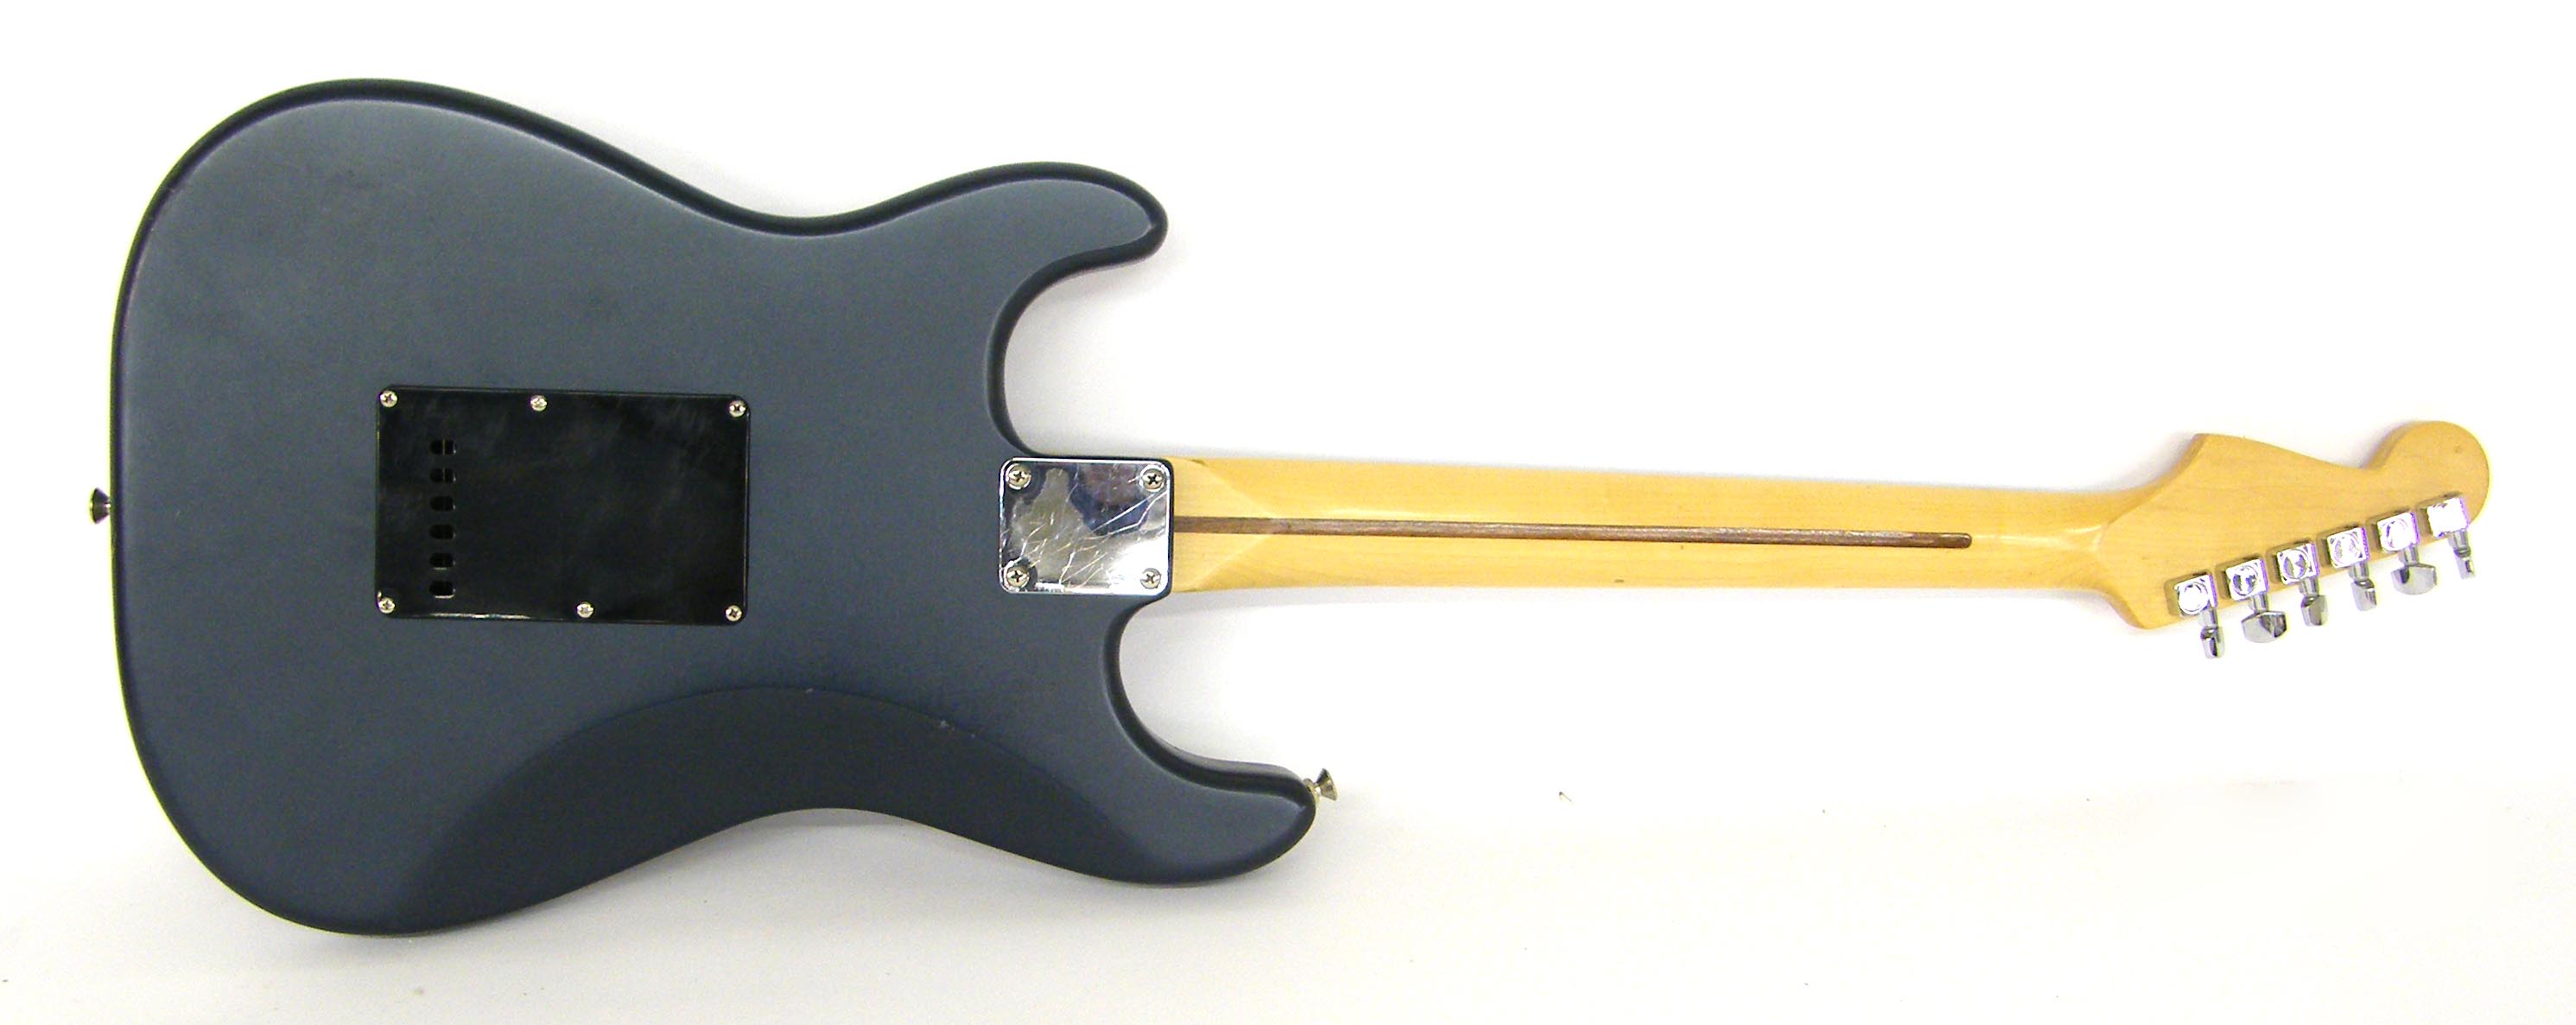 2003 Fender FSR Stratocaster electric guitar, made in Mexico, ser. no. MZ3134717, satin blue - Image 2 of 2